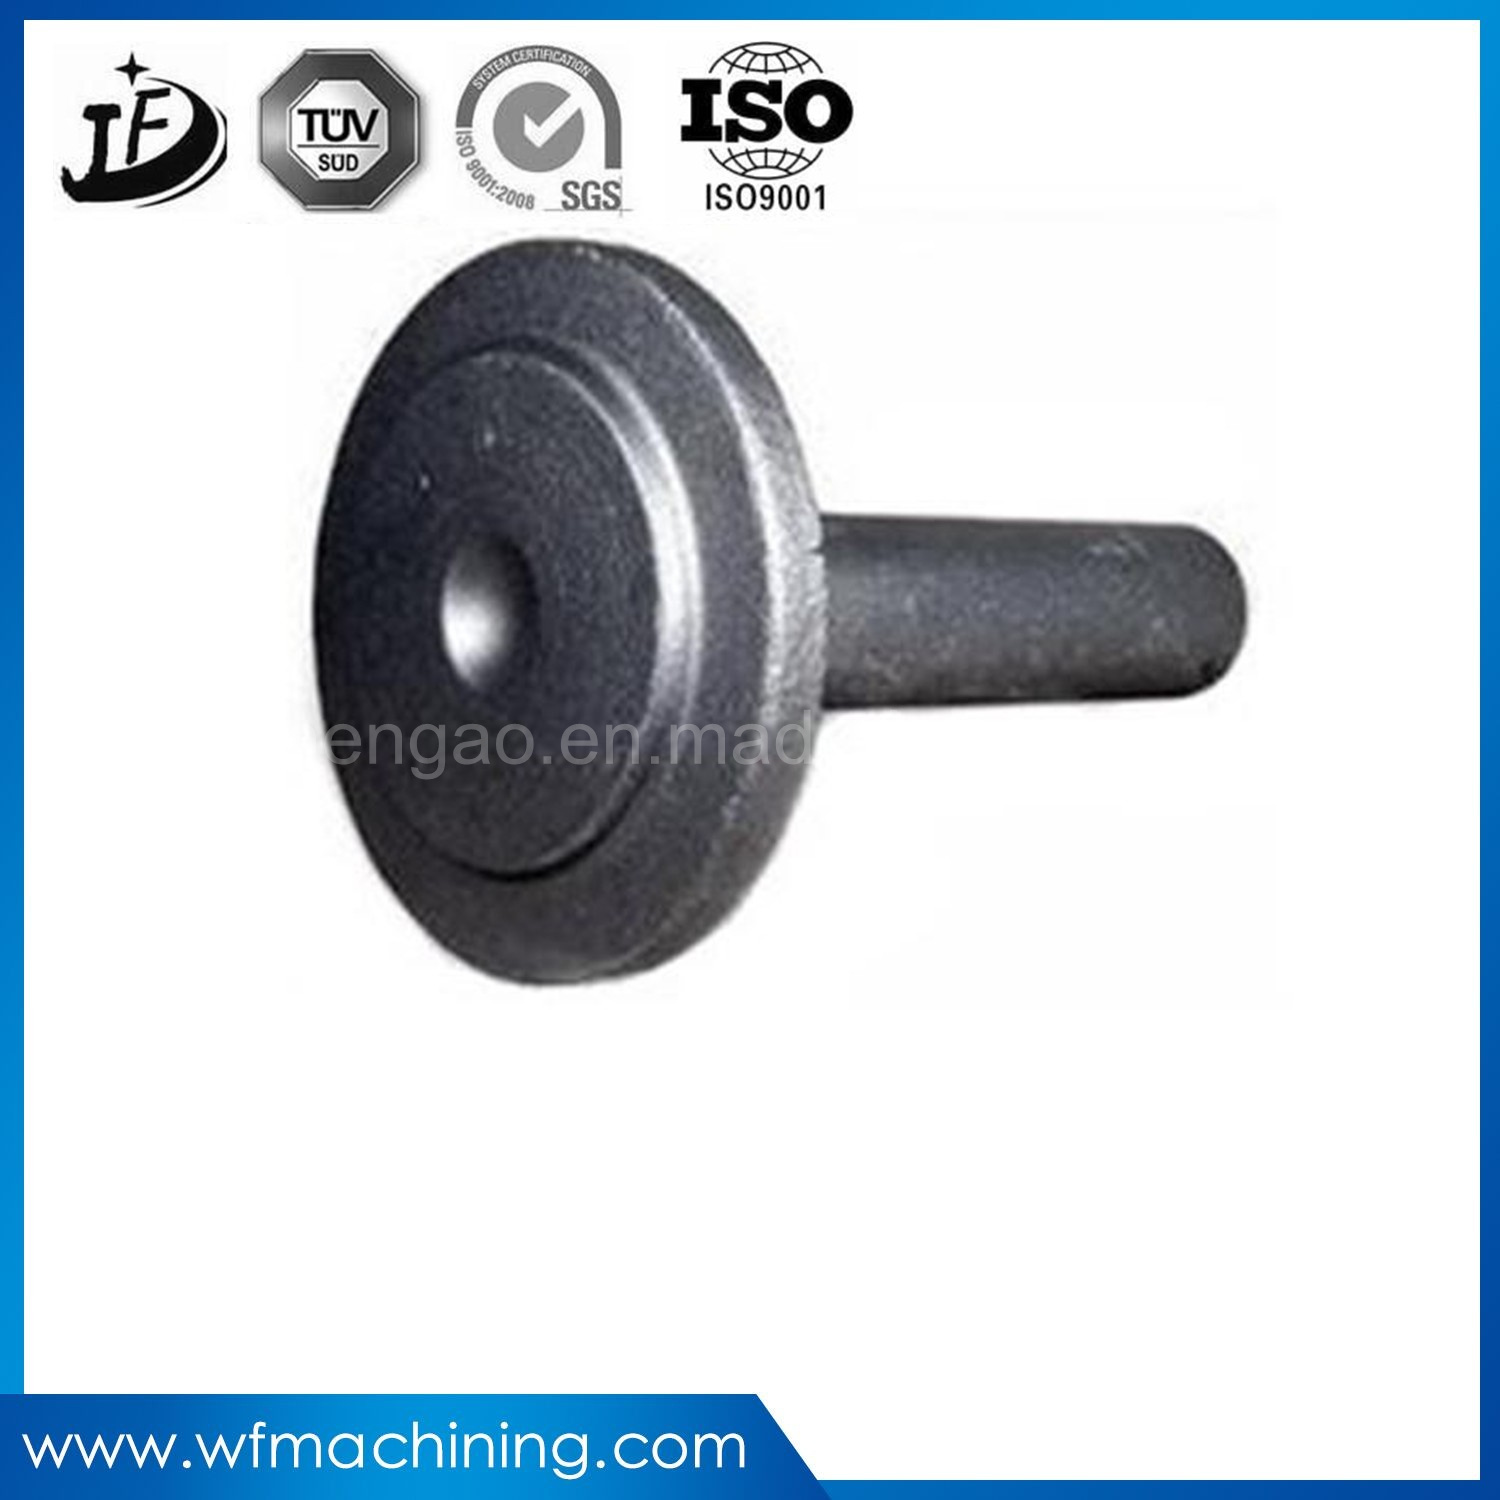 OEM/Customized Wrought Iron Die Forging Hammer for Stabilizer